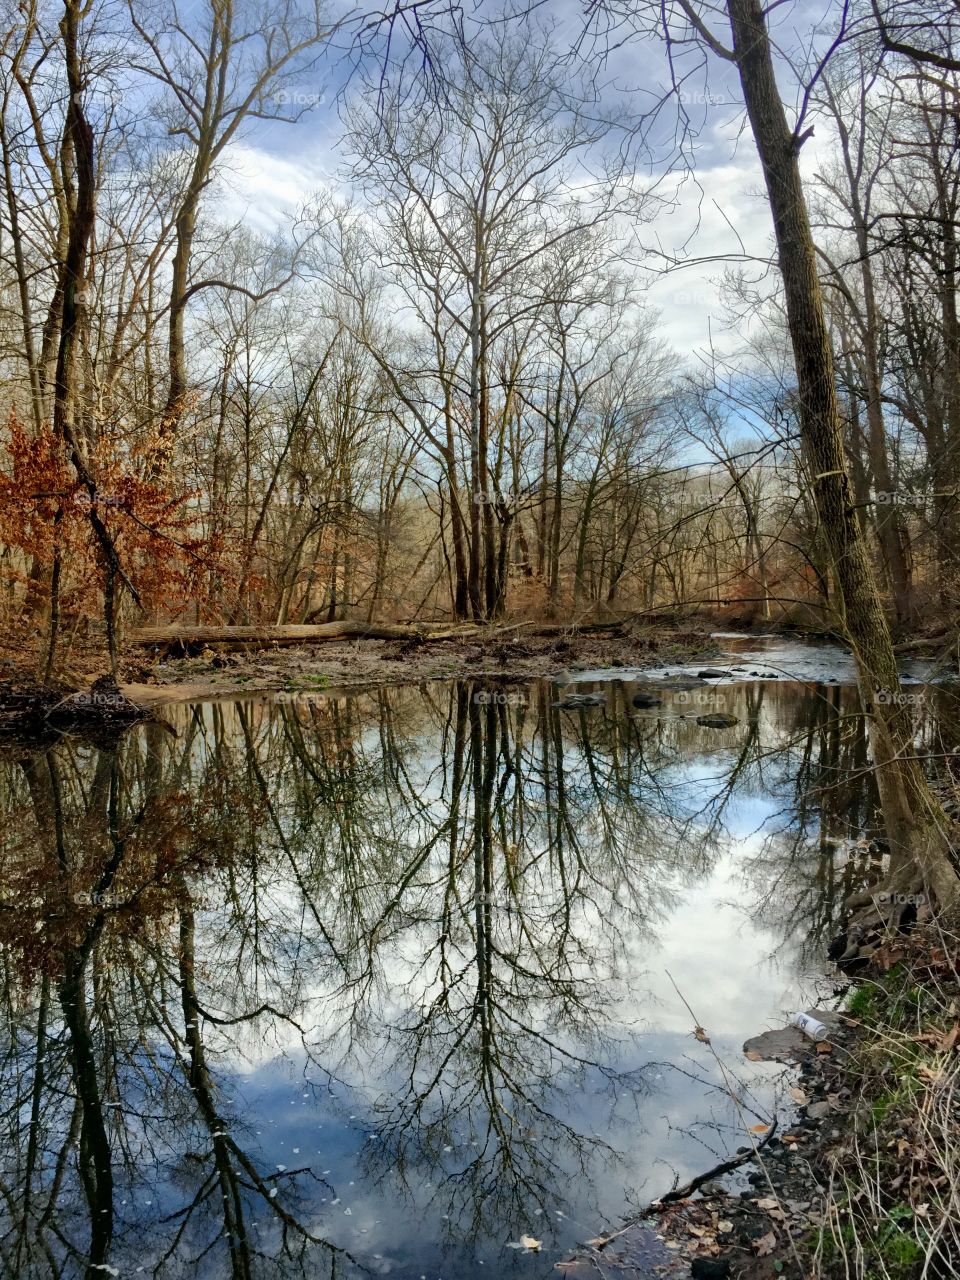 Winter reflections in the Pennypack Creek